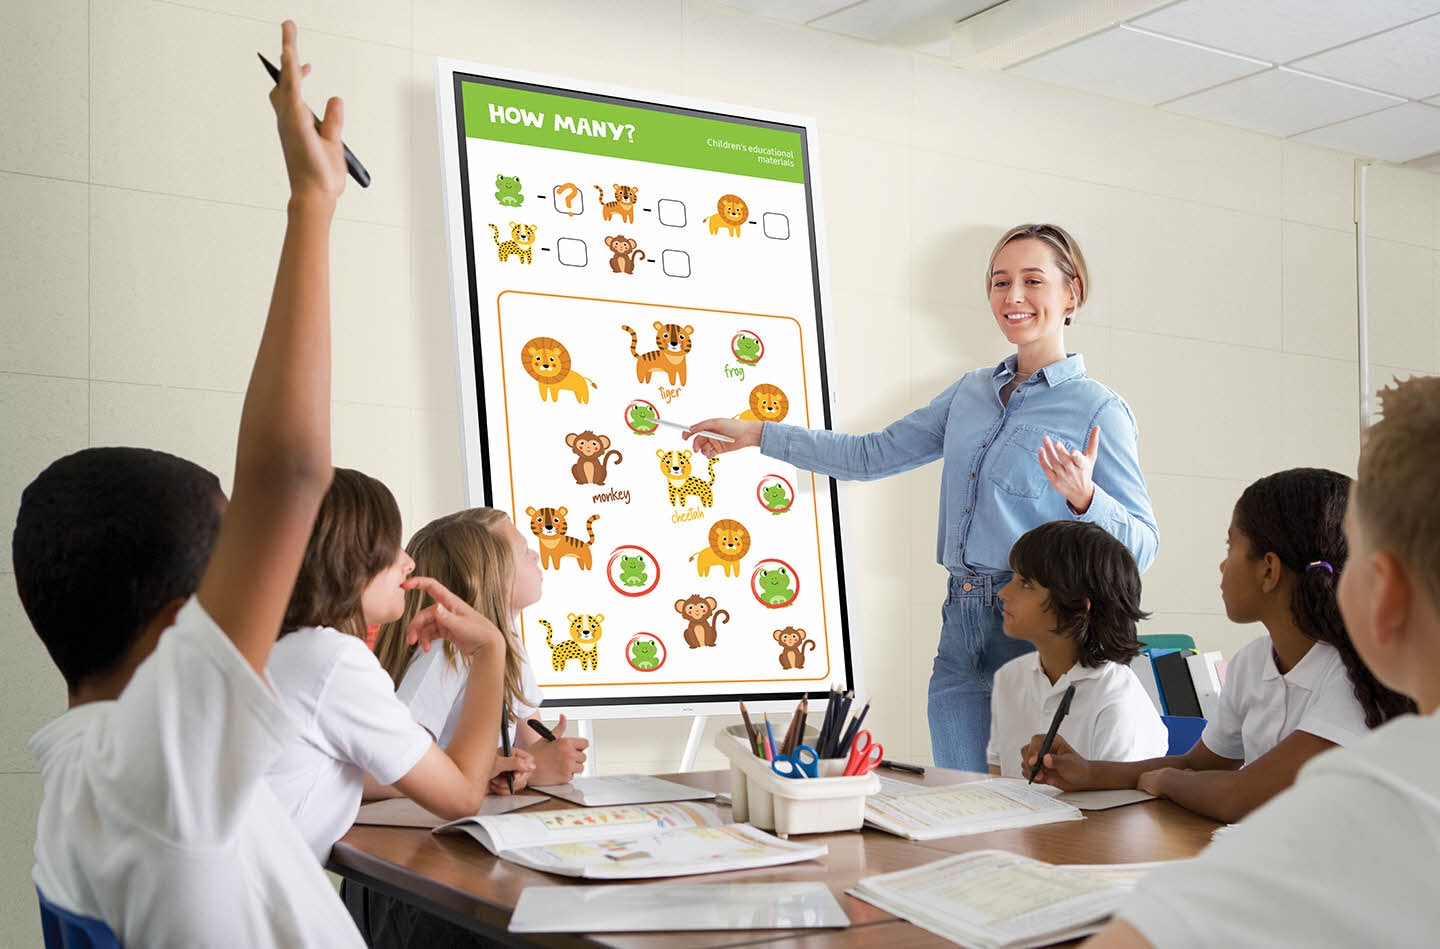 The teaching materials are displayed on the vertical Flip Pro installed in the classroom, and the class proceeds.